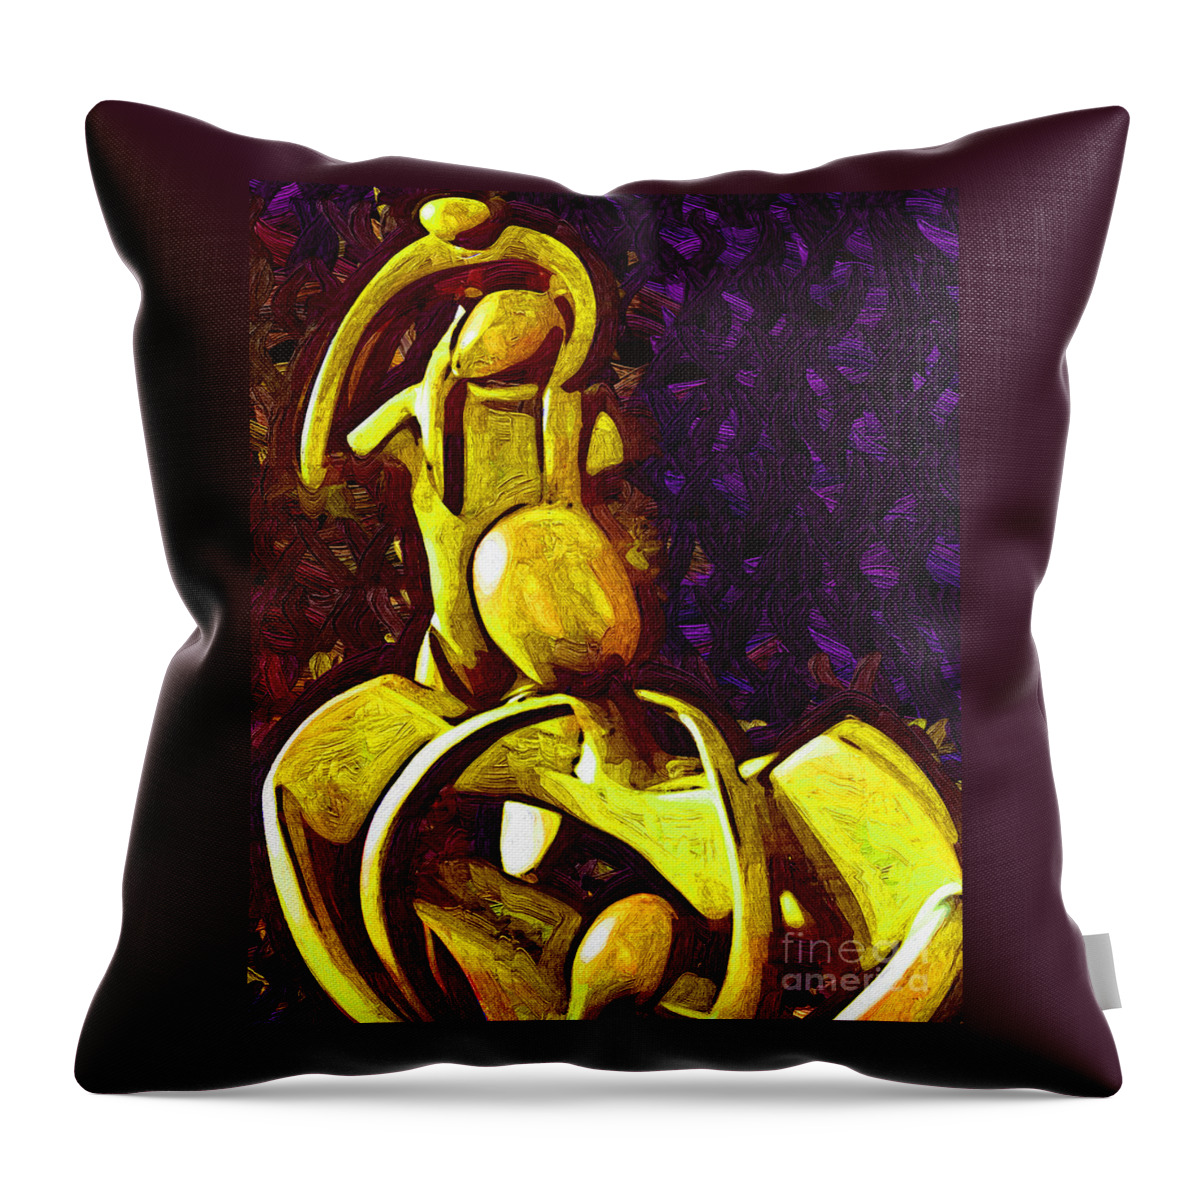 Family Throw Pillow featuring the digital art The Family Unit in Gold by Kirt Tisdale